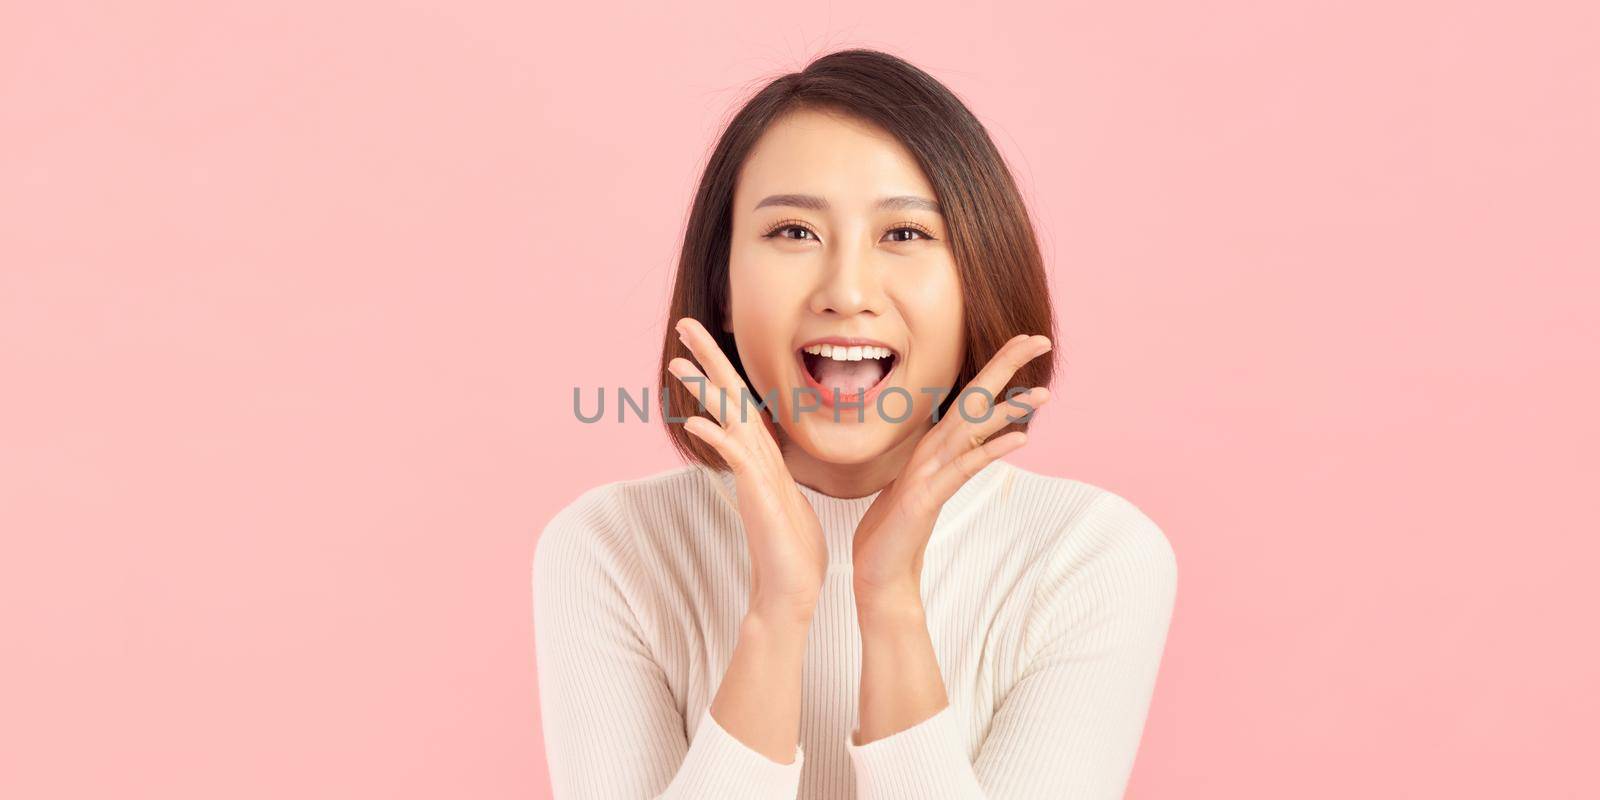 Scream and shout! Pretty young woman holding hands near opened mouth. Pink background.